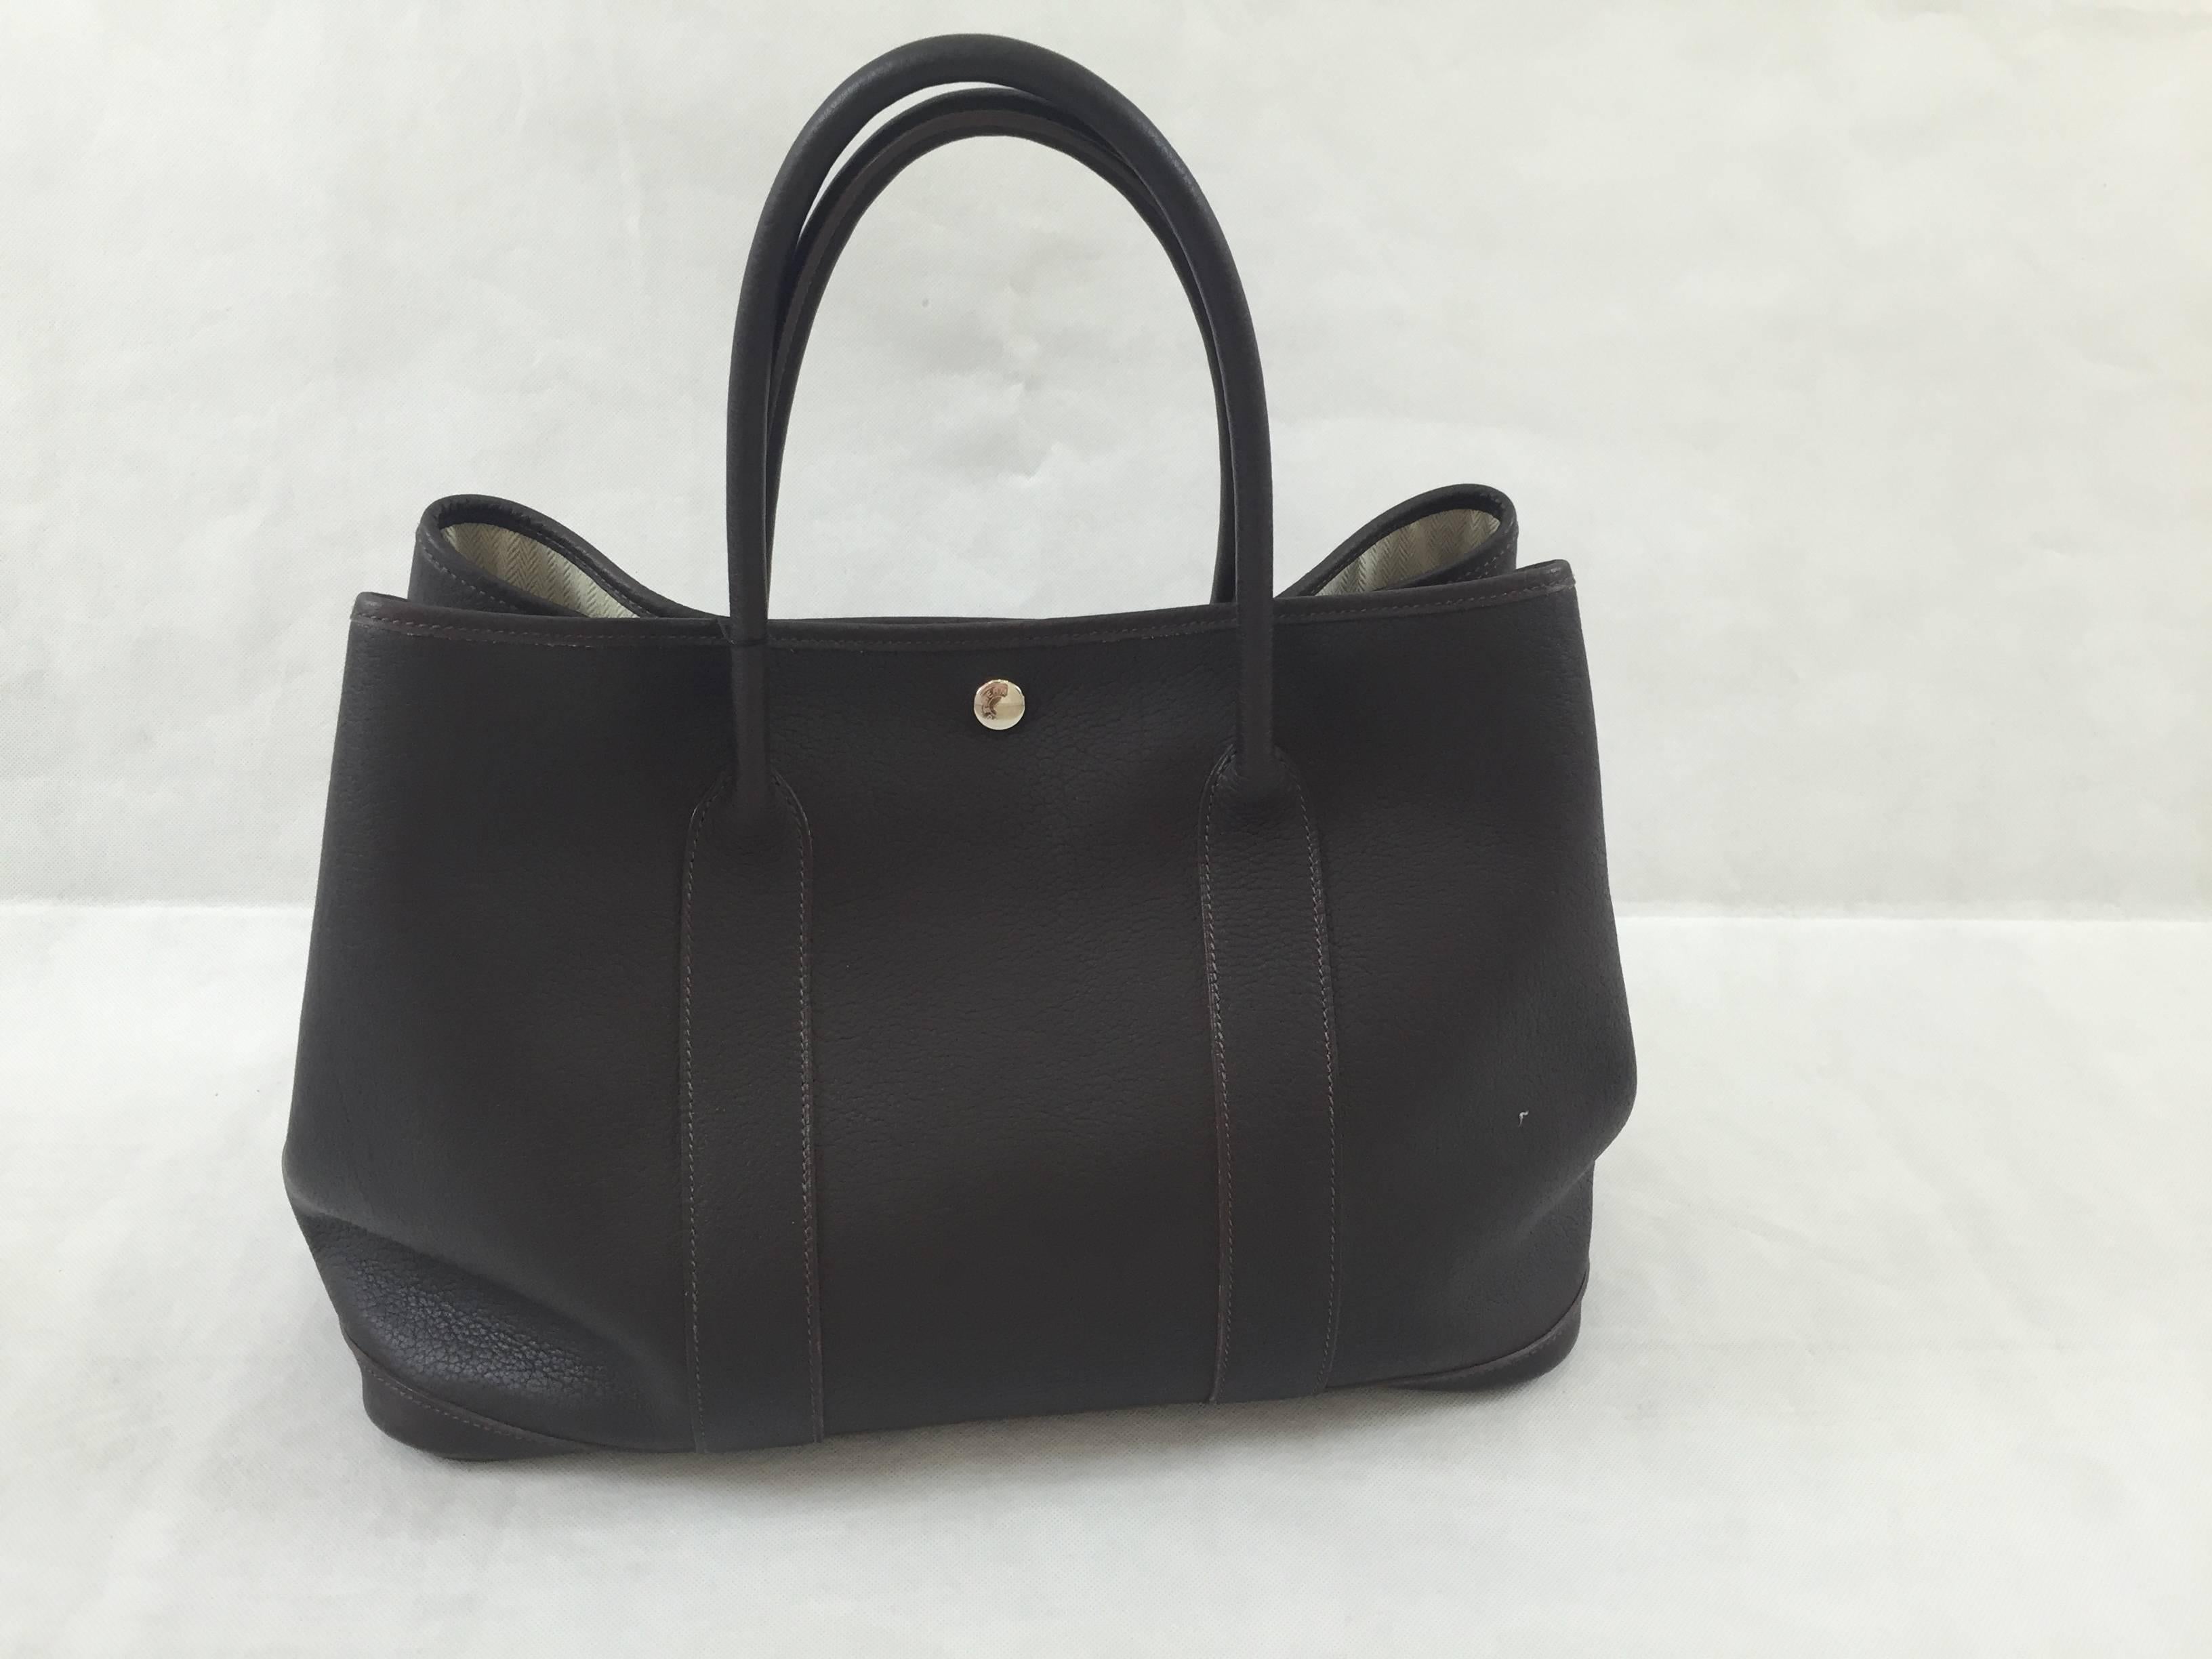 Hermès Garden party bag 36 cm. Chocolate color. Soft Leather. Good condition, some little scratches on the bottom and on the handle (see pictures)